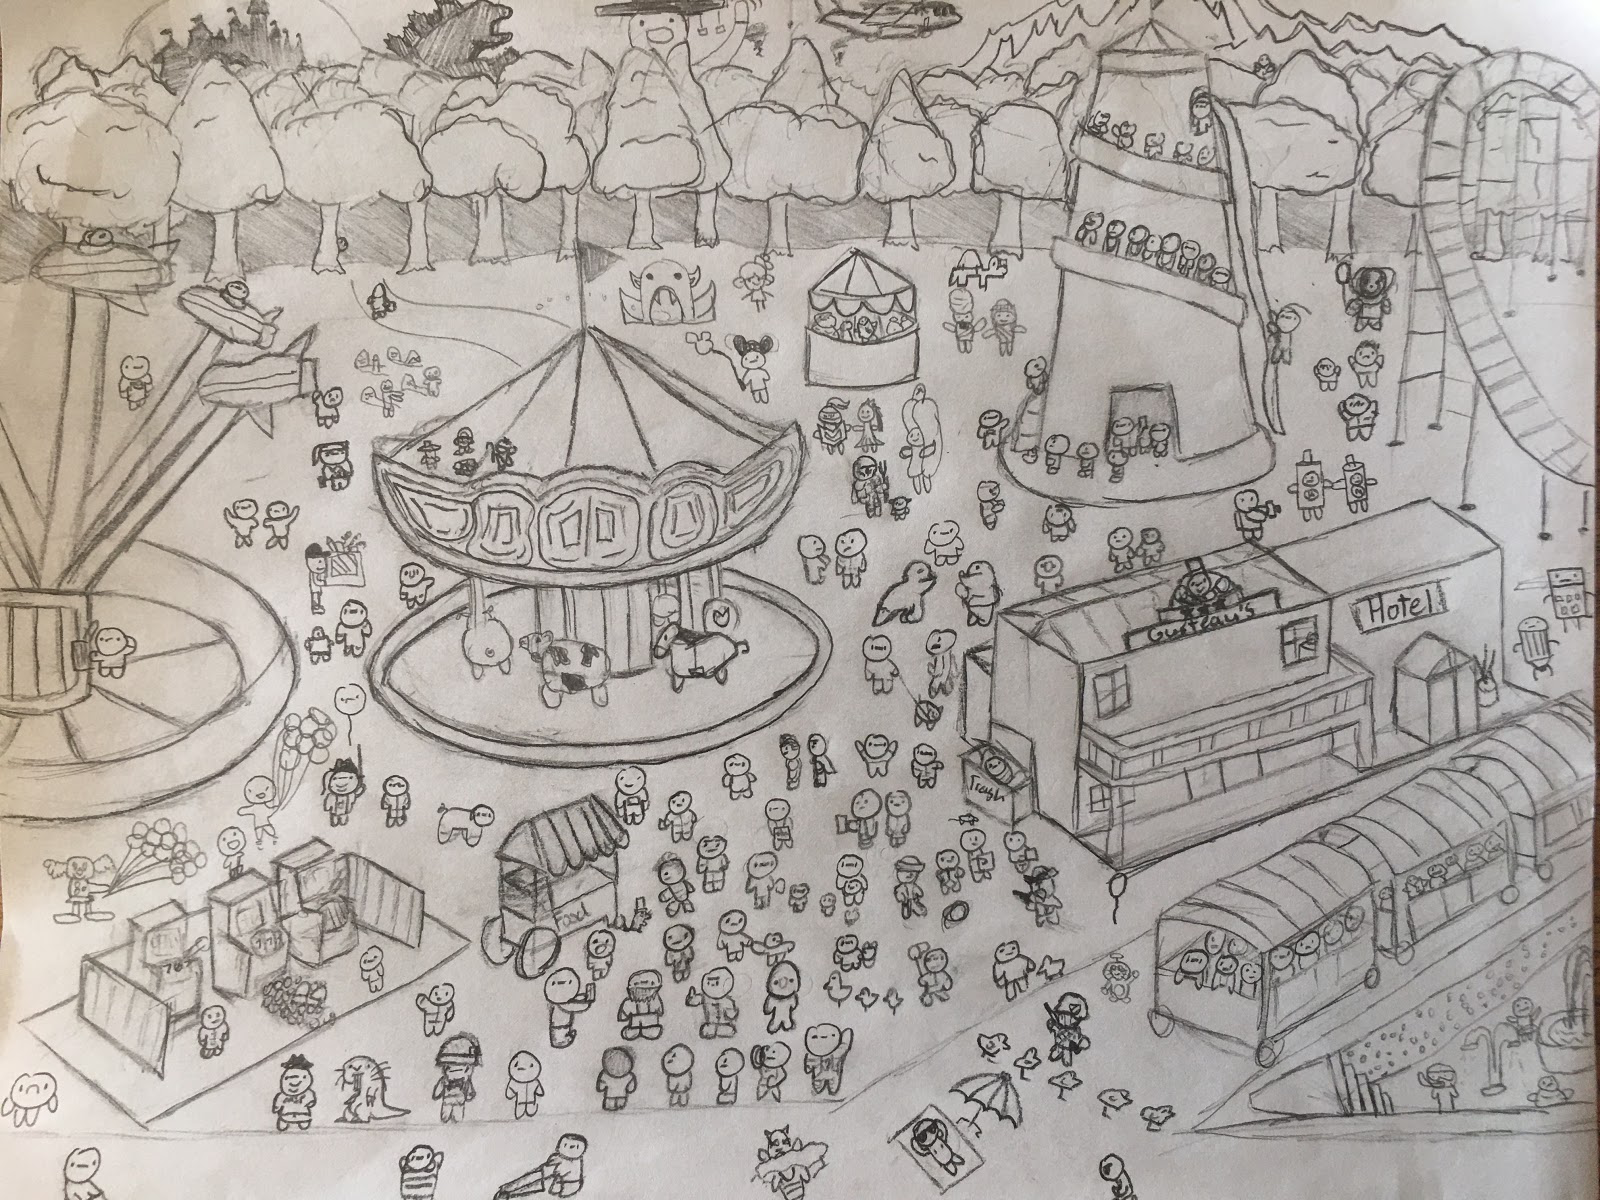 Drawing of a festival